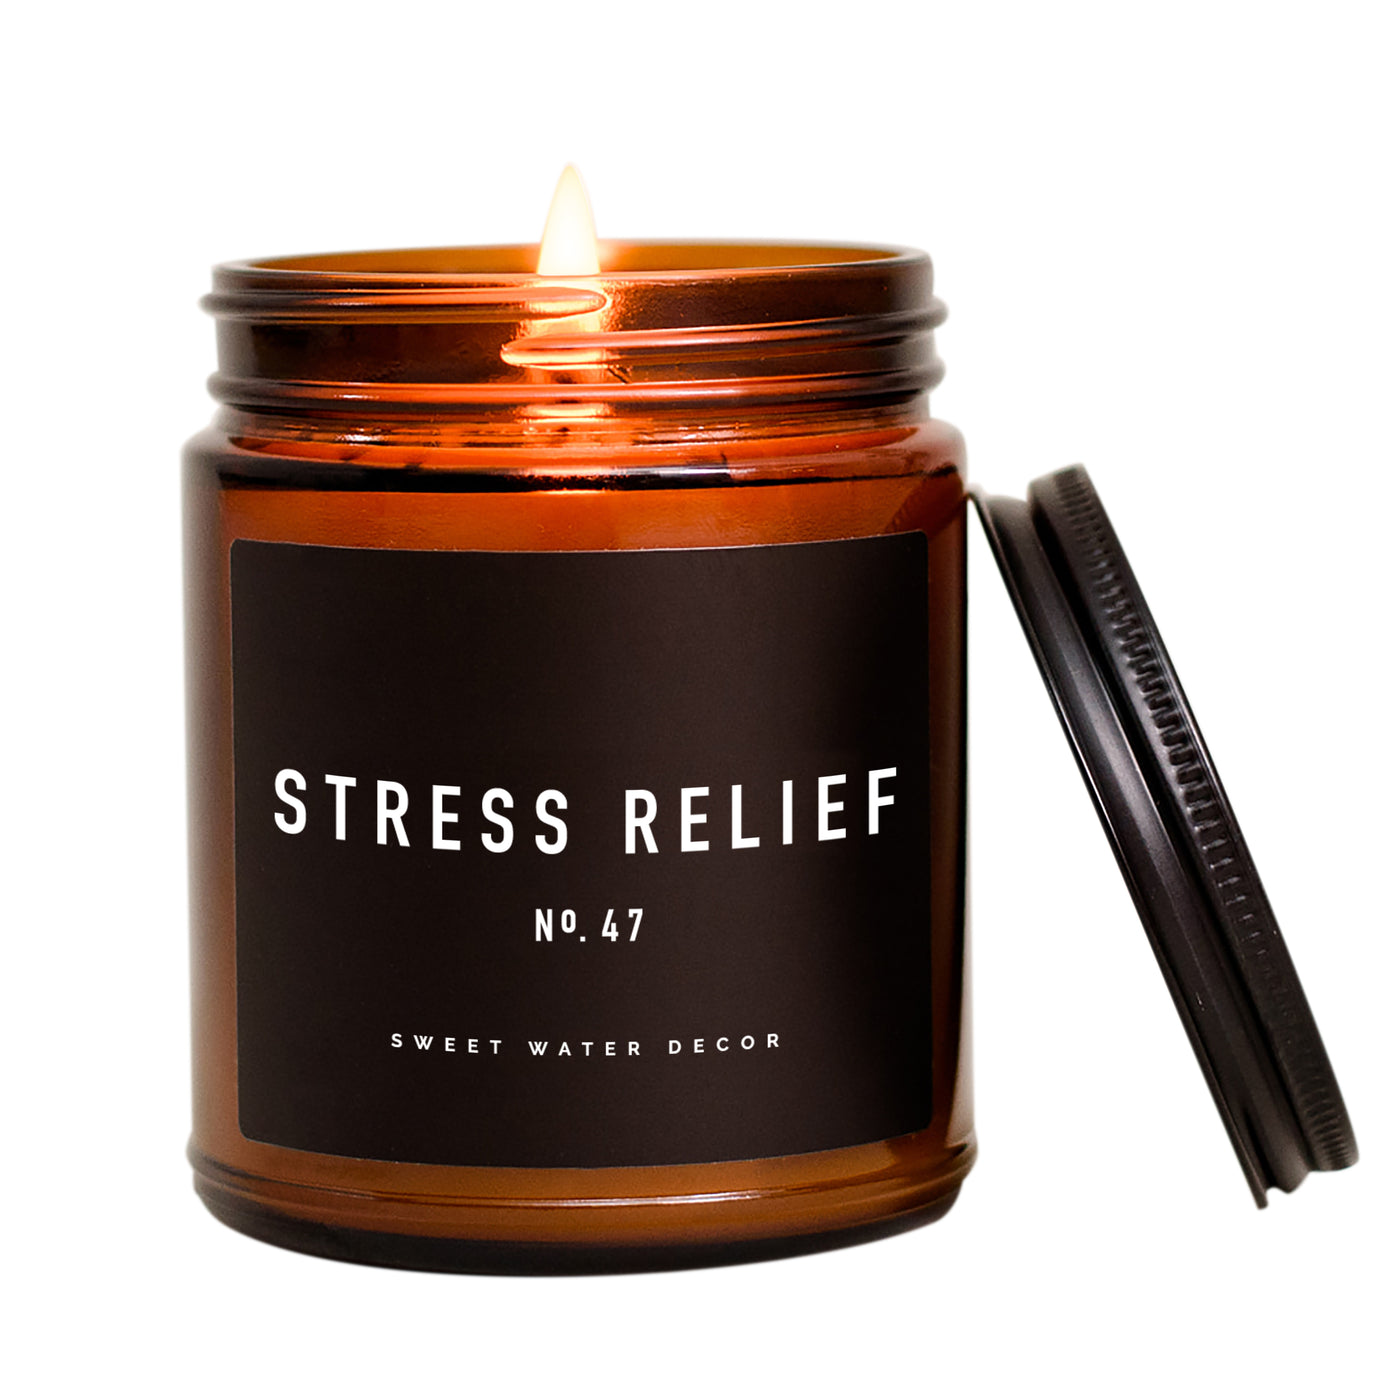 Stress Relief Soy Candle - Amber Jar - 9 oz